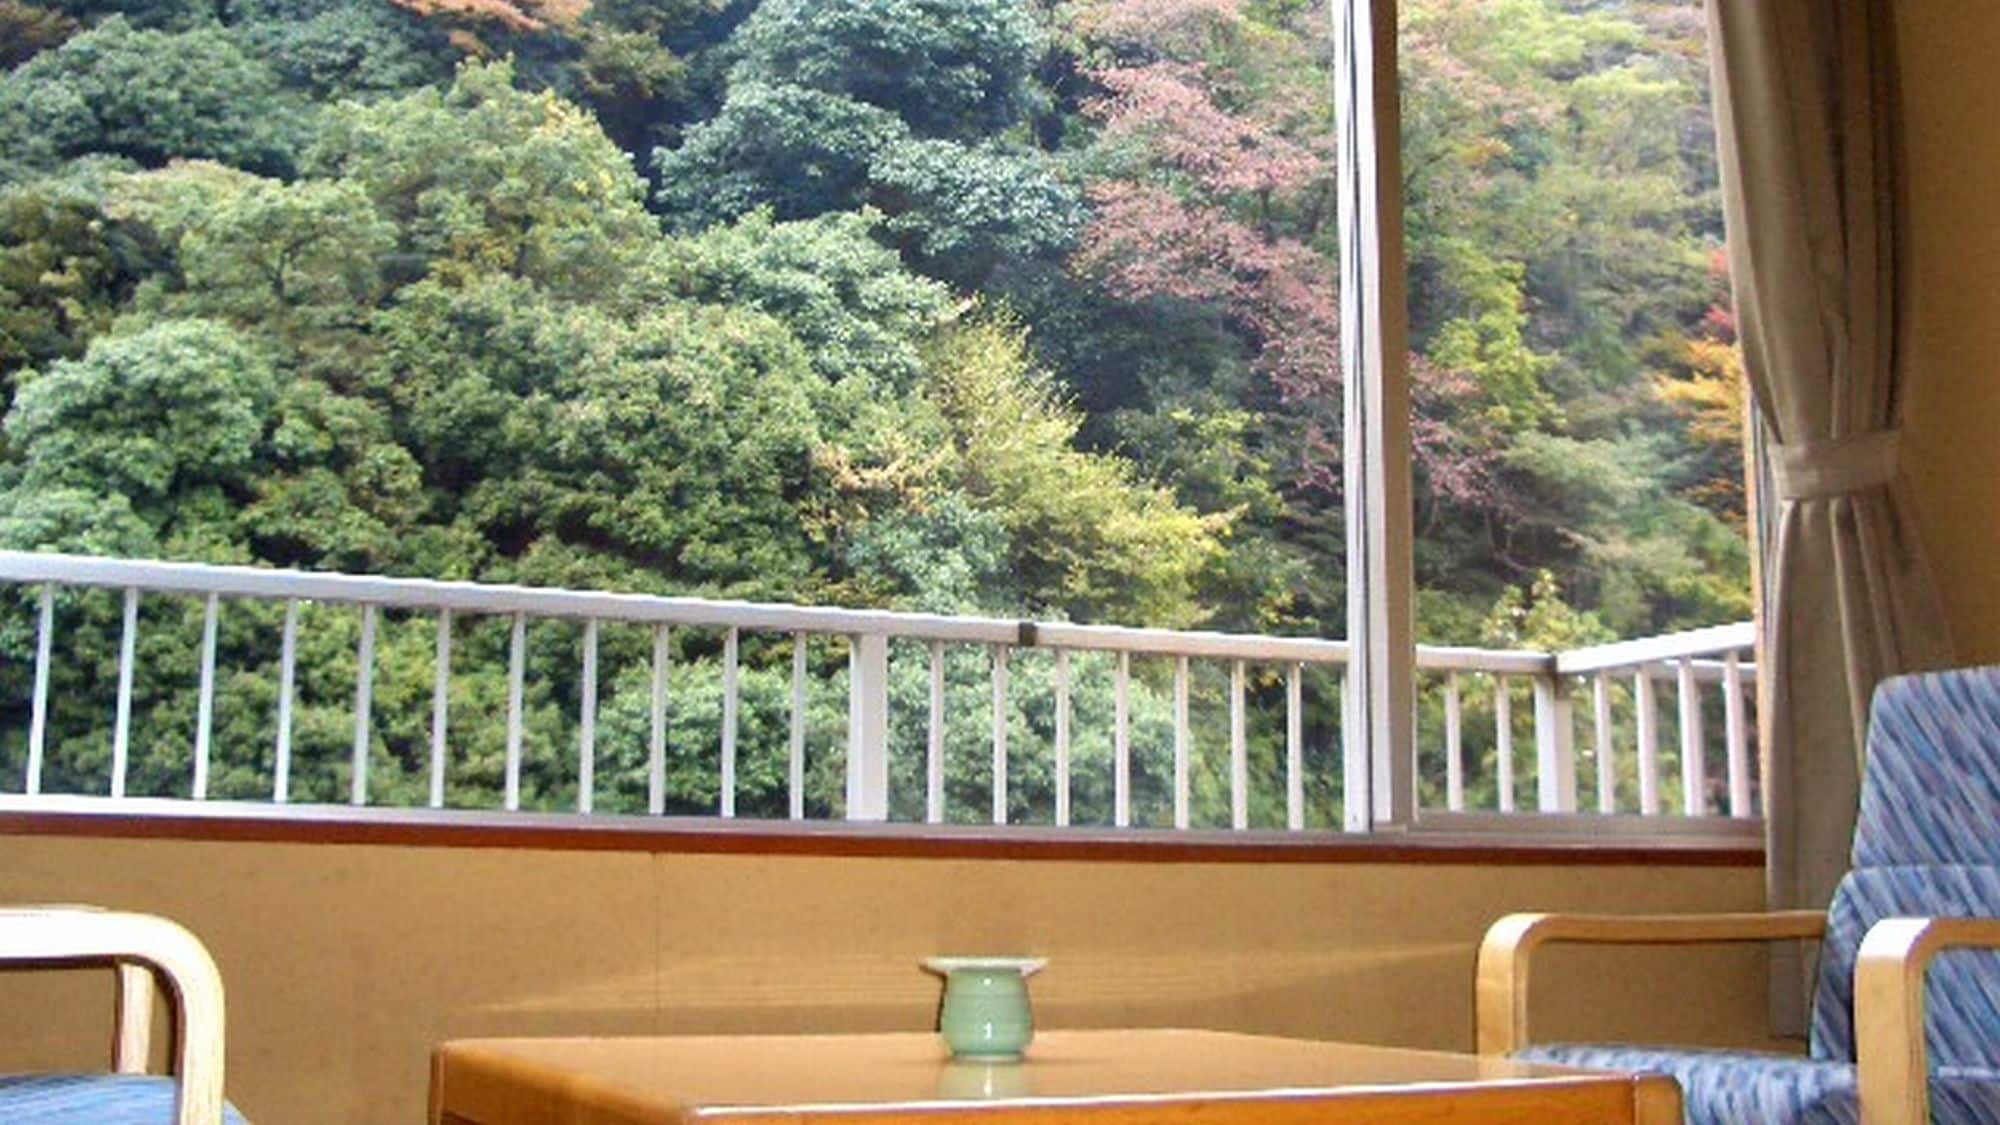 An example of a Japanese-style room on the river side